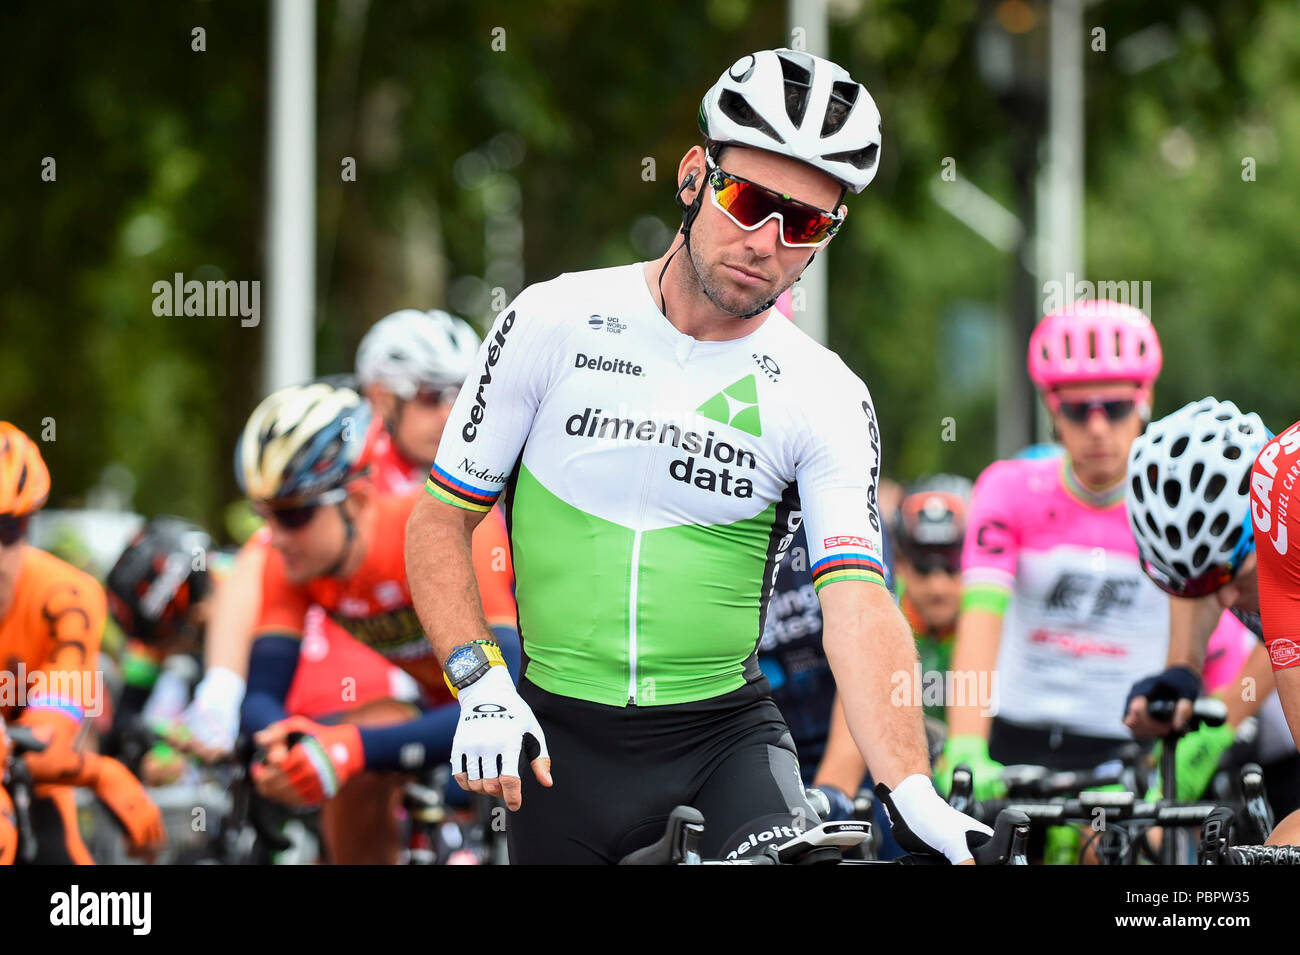 London, UK. 29 July 2018. Mark Cavendish (Team Dimension Data) joins riders  gathered on the start line for the Prudential RideLondon-Surrey Classic,  Britain's only men's UCI WorldTour race and the world's richest